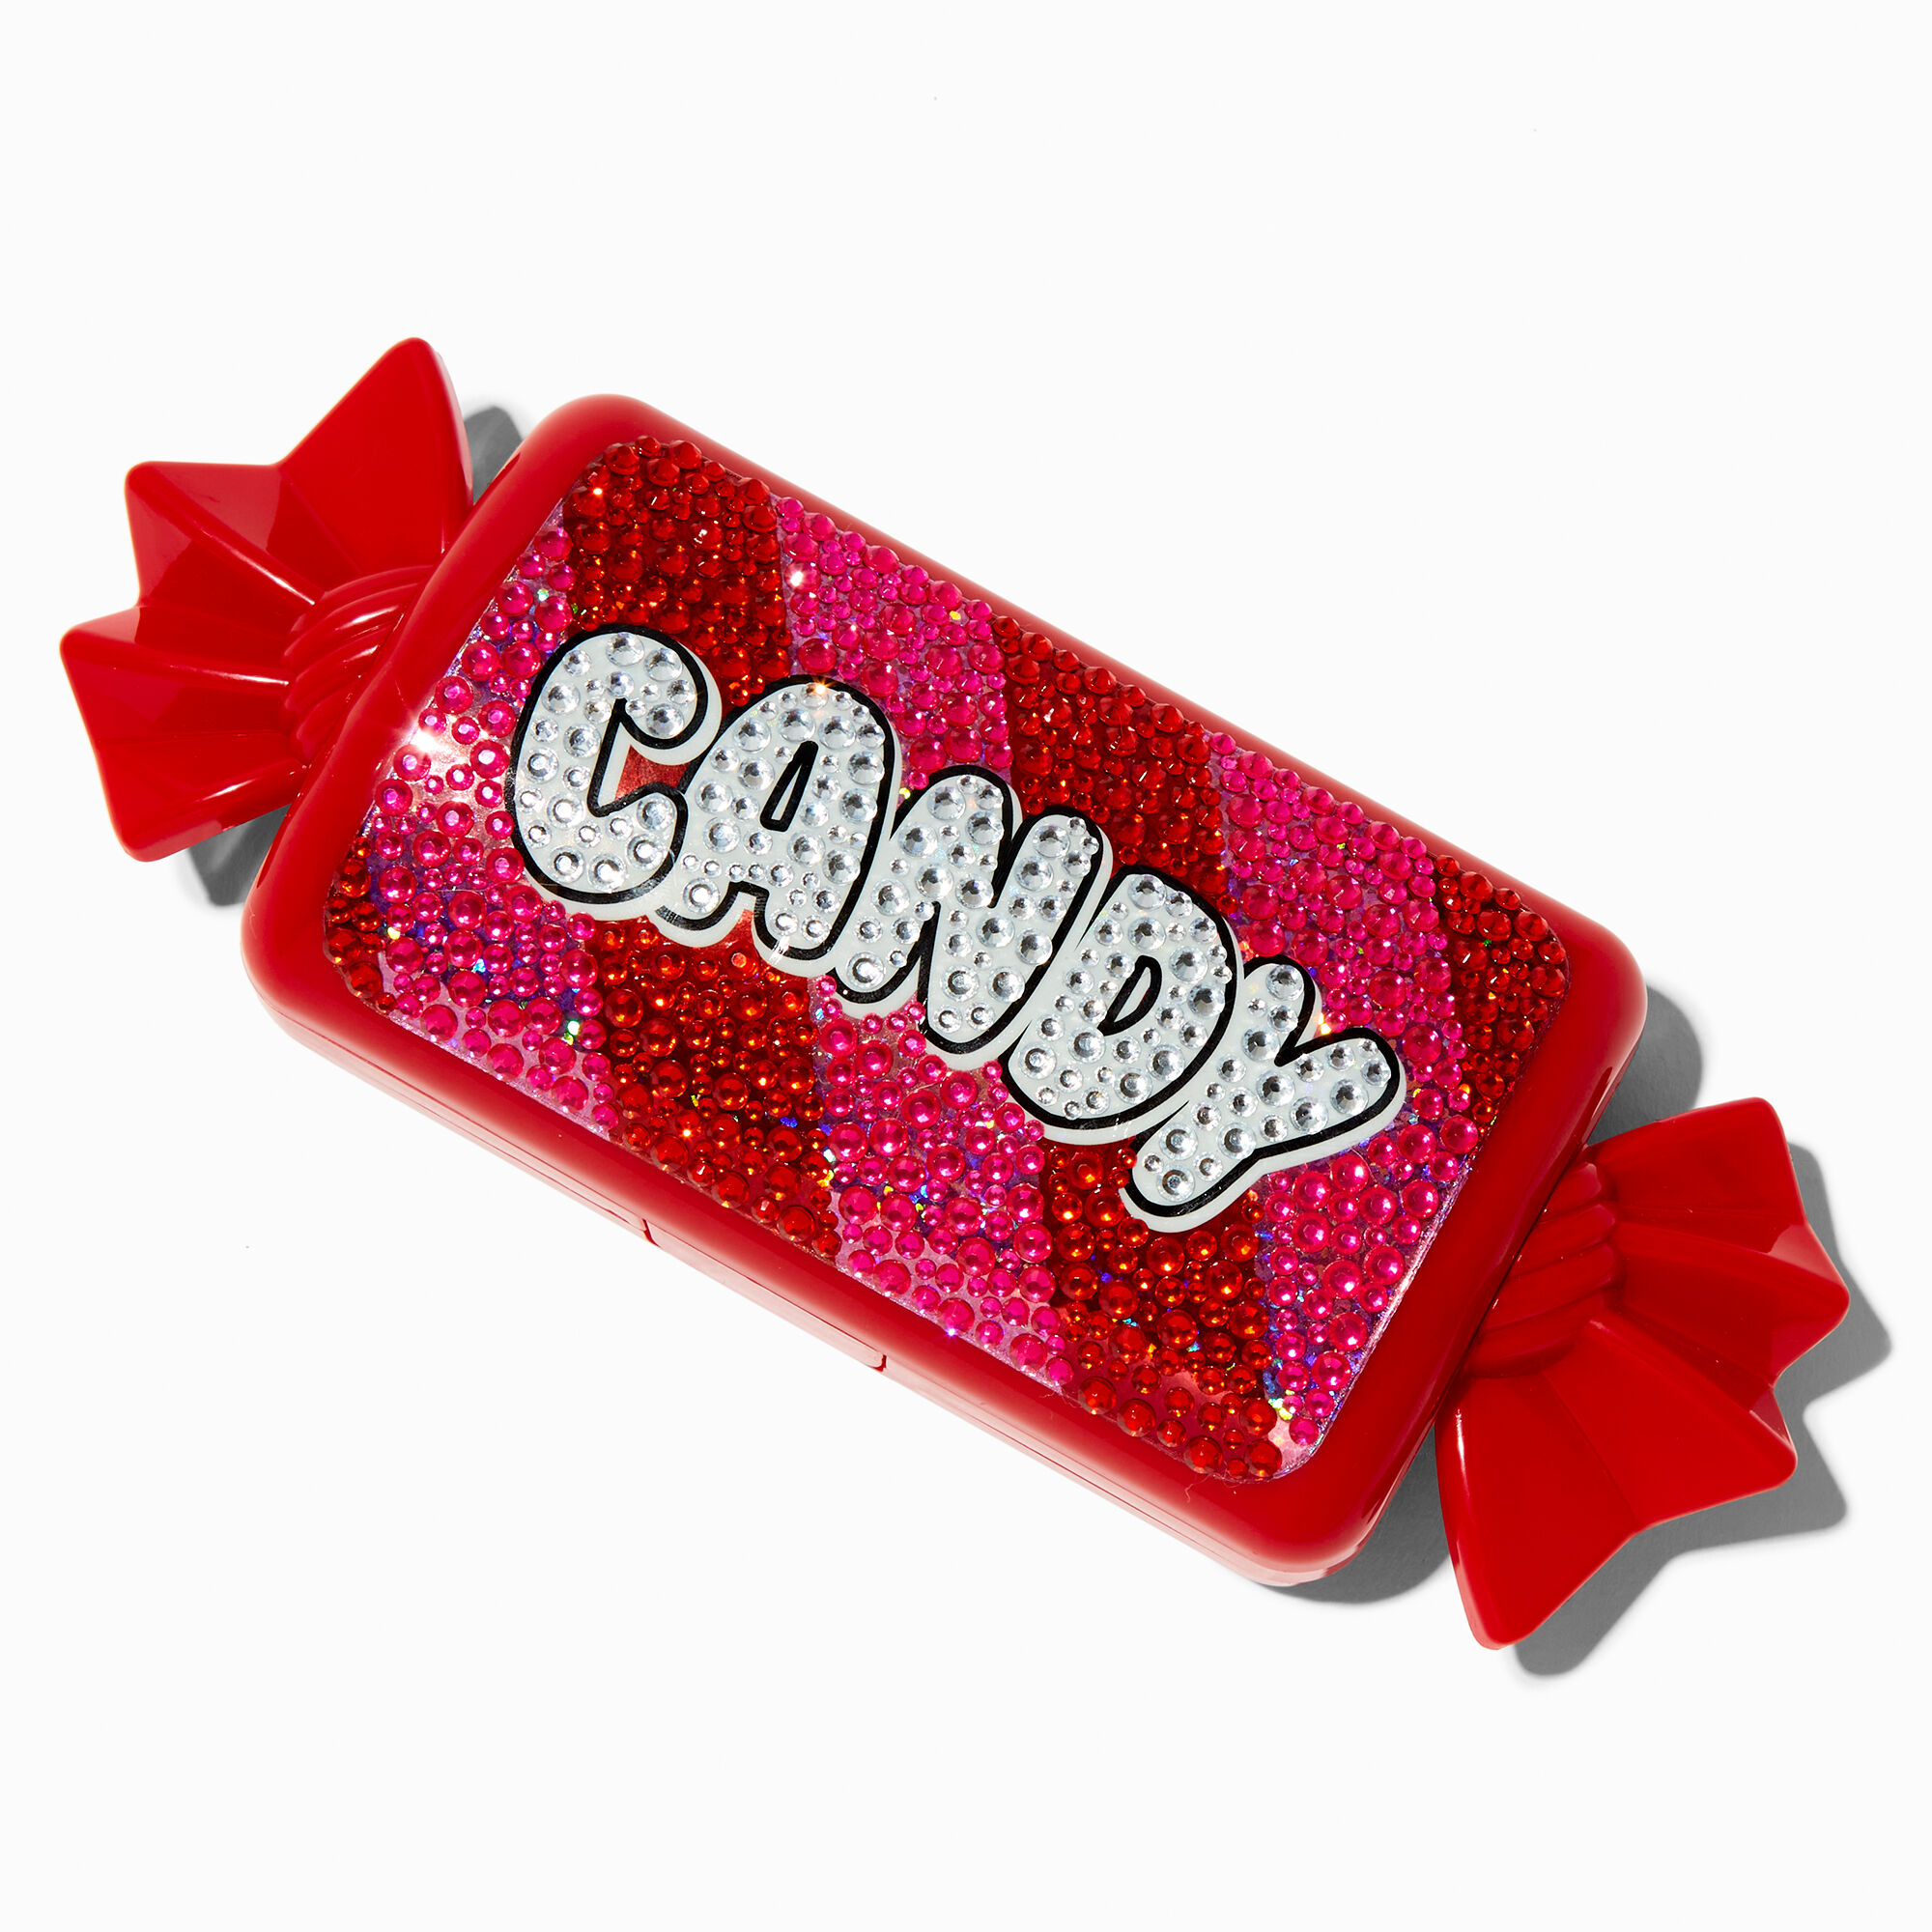 View Claires Bling Candy Wrapper Makeup Set Red information